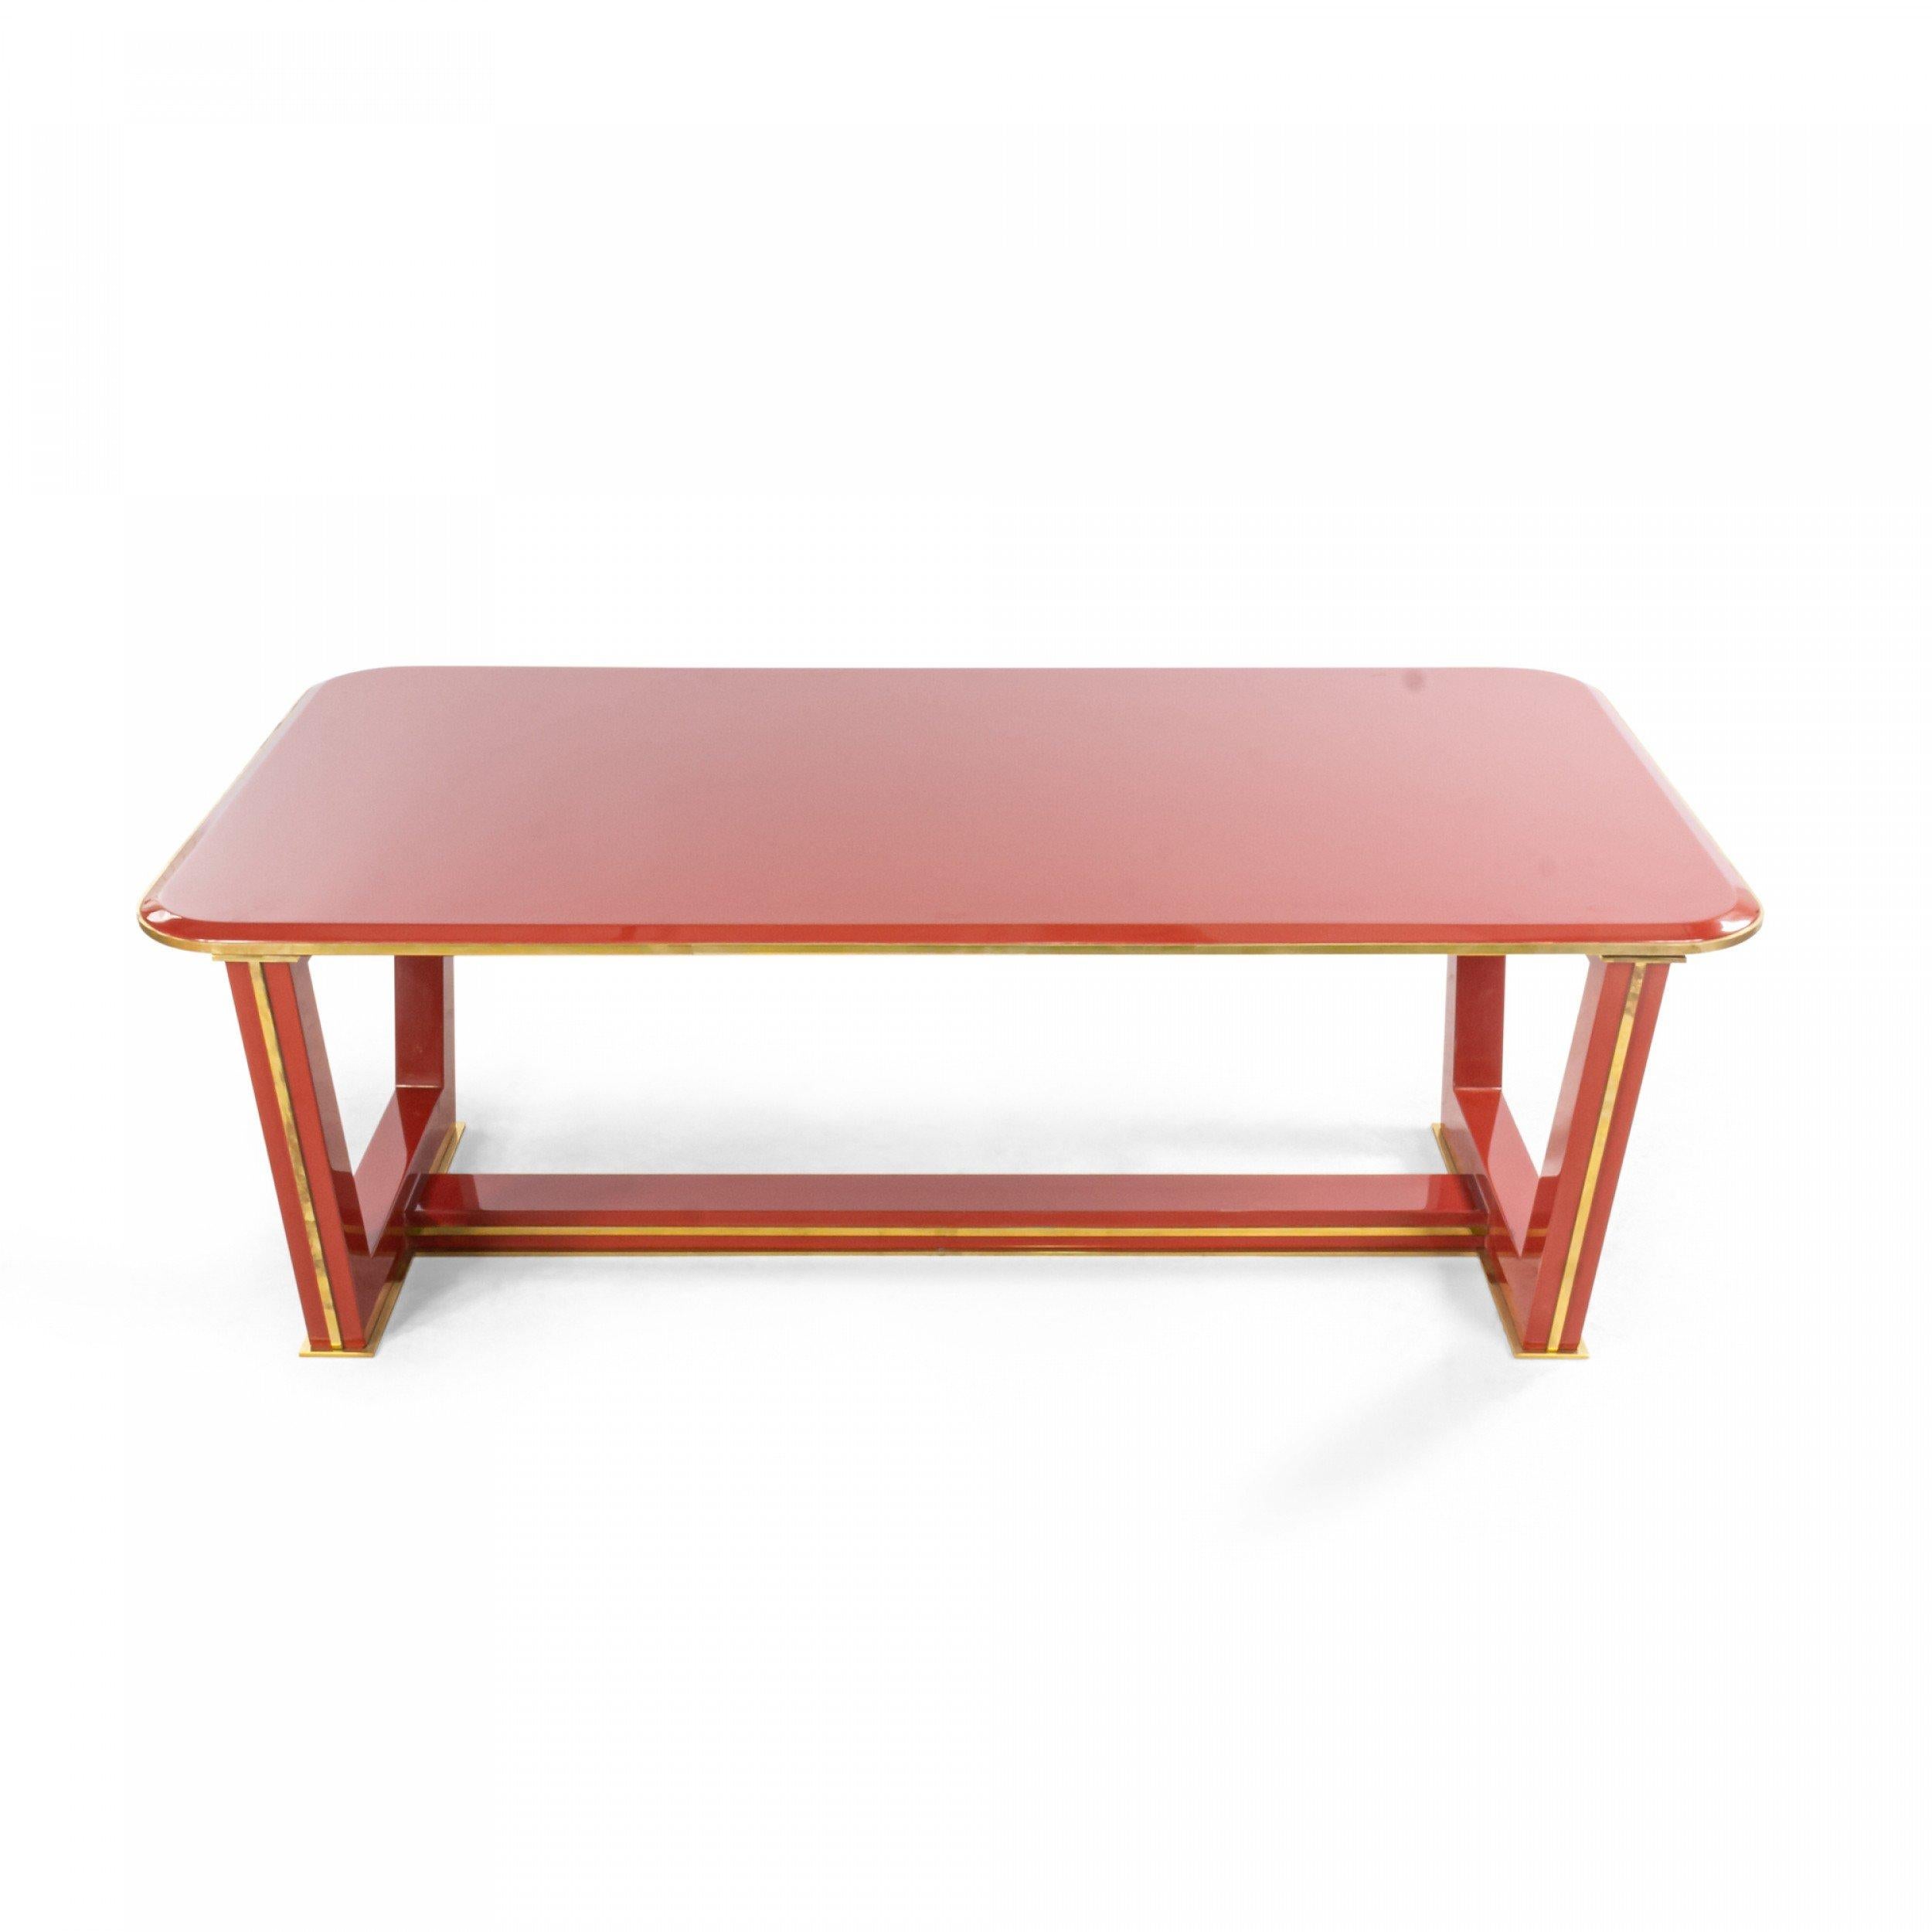 Customizable French 1940s style (modern) red lacquered coffee table with a rounded corner rectangular top with brass trim, four legs, and stretcher base.
     